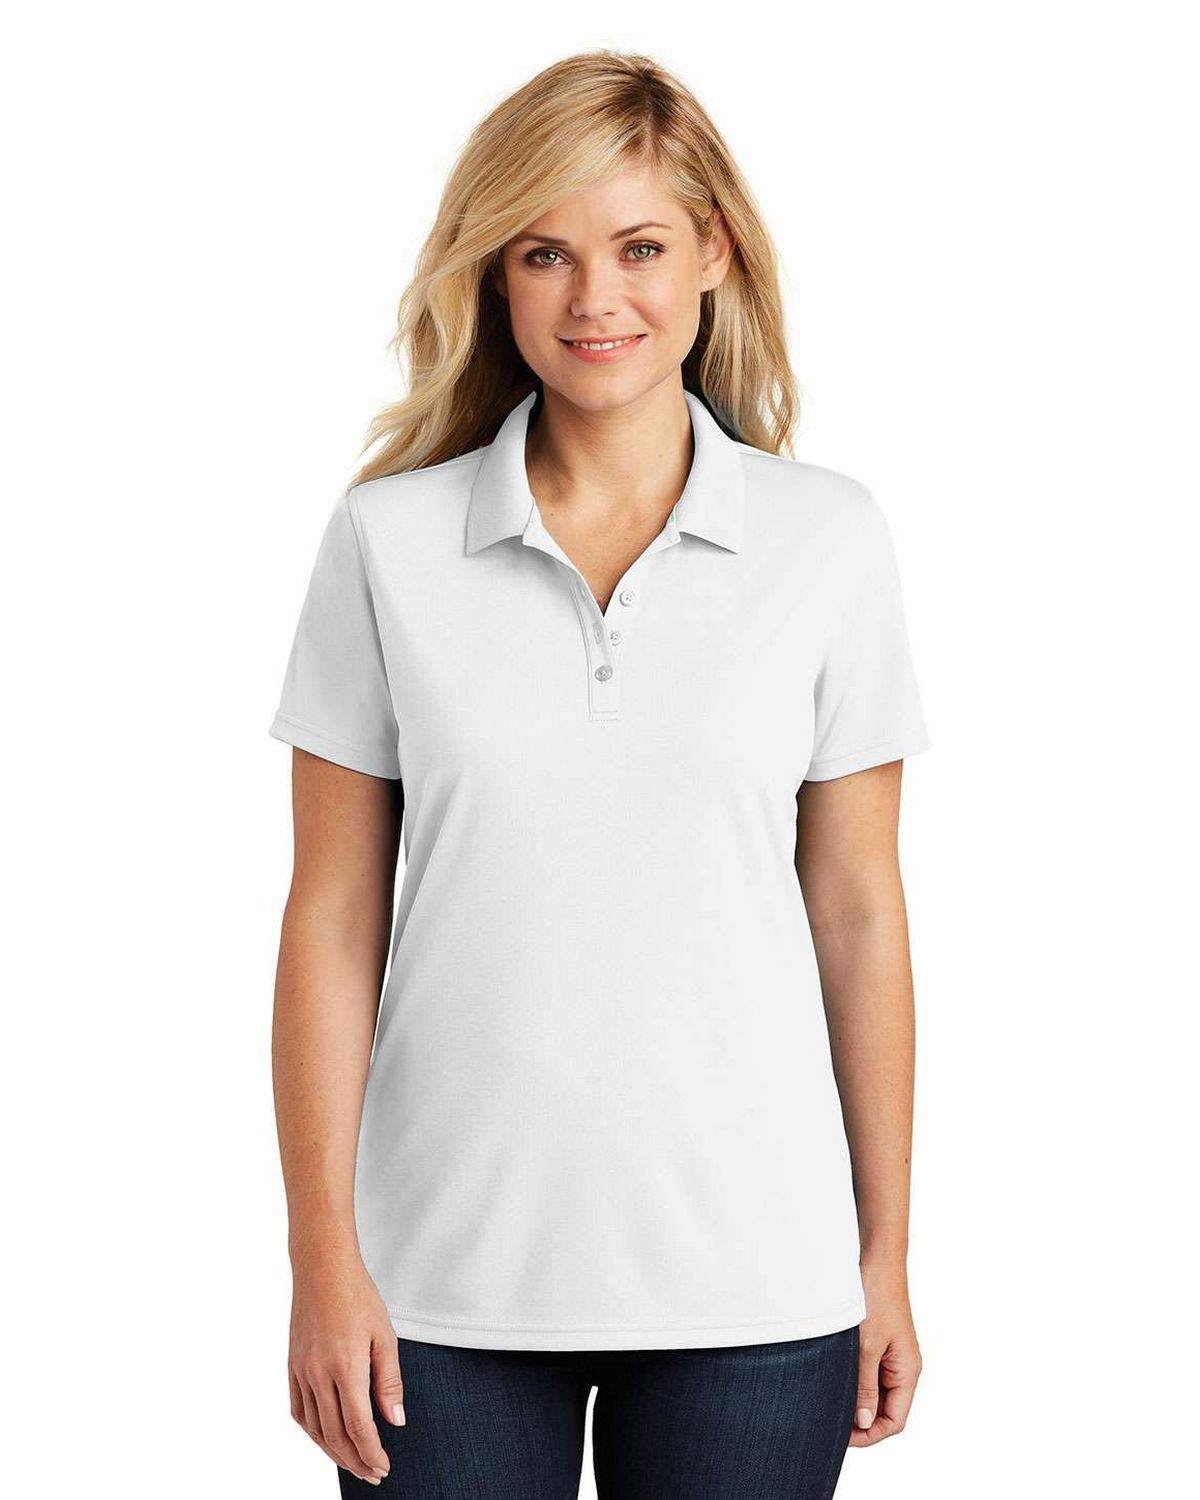 Size Chart for Port Authority LK110 Ladies Dry Zone UV Micro Mesh Polo ...